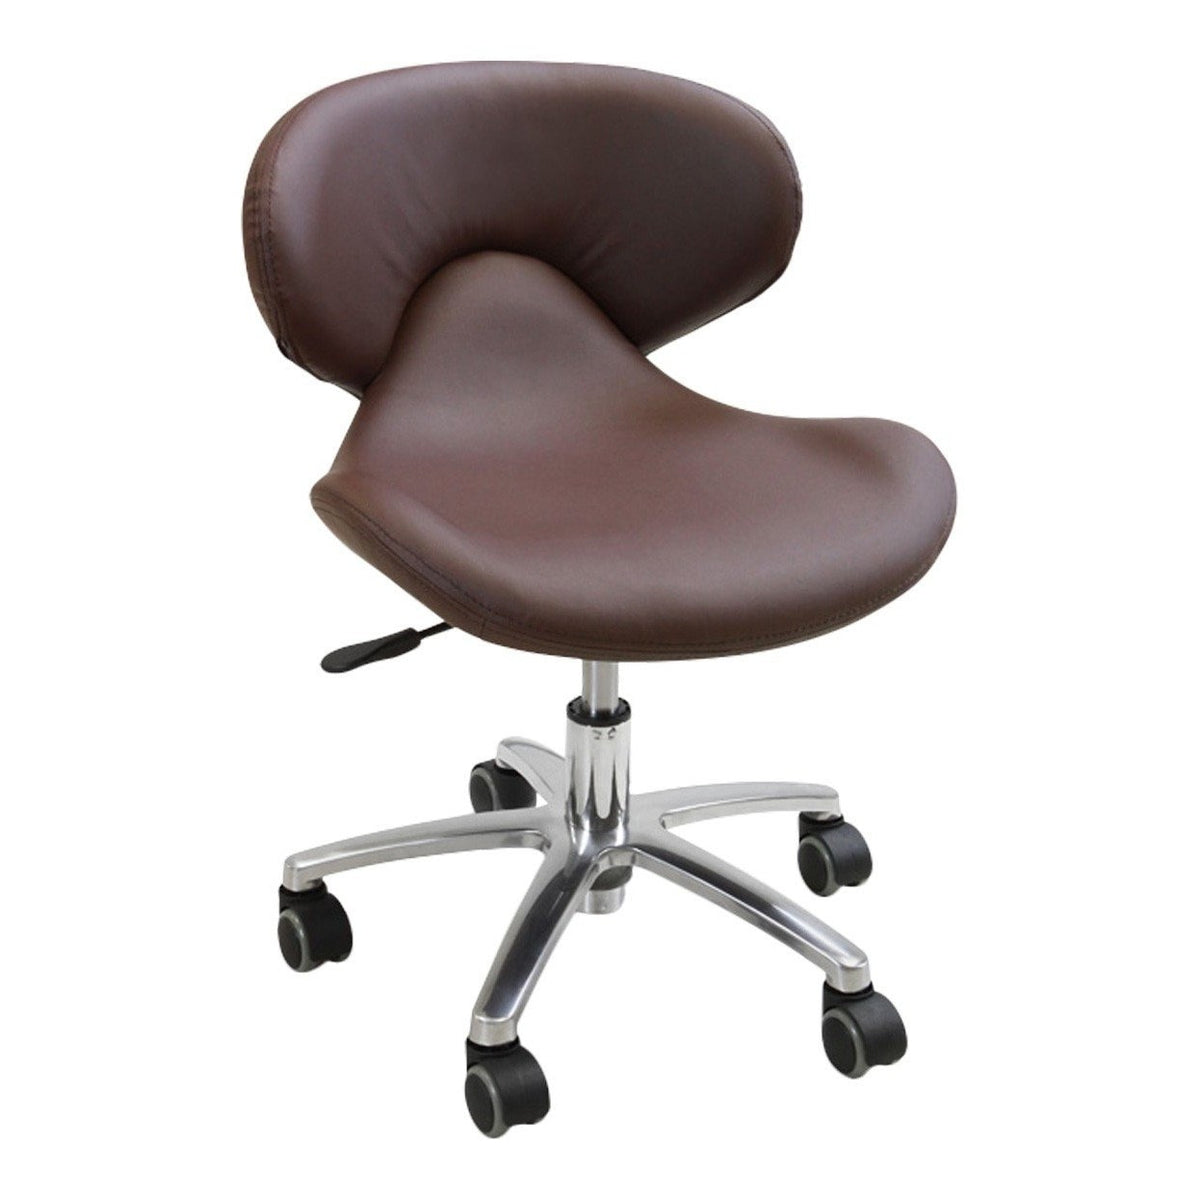 Continuum Continuum Pedicute Standard Portable Spa Package Pedicure &amp; Spa Chairs - ChairsThatGive